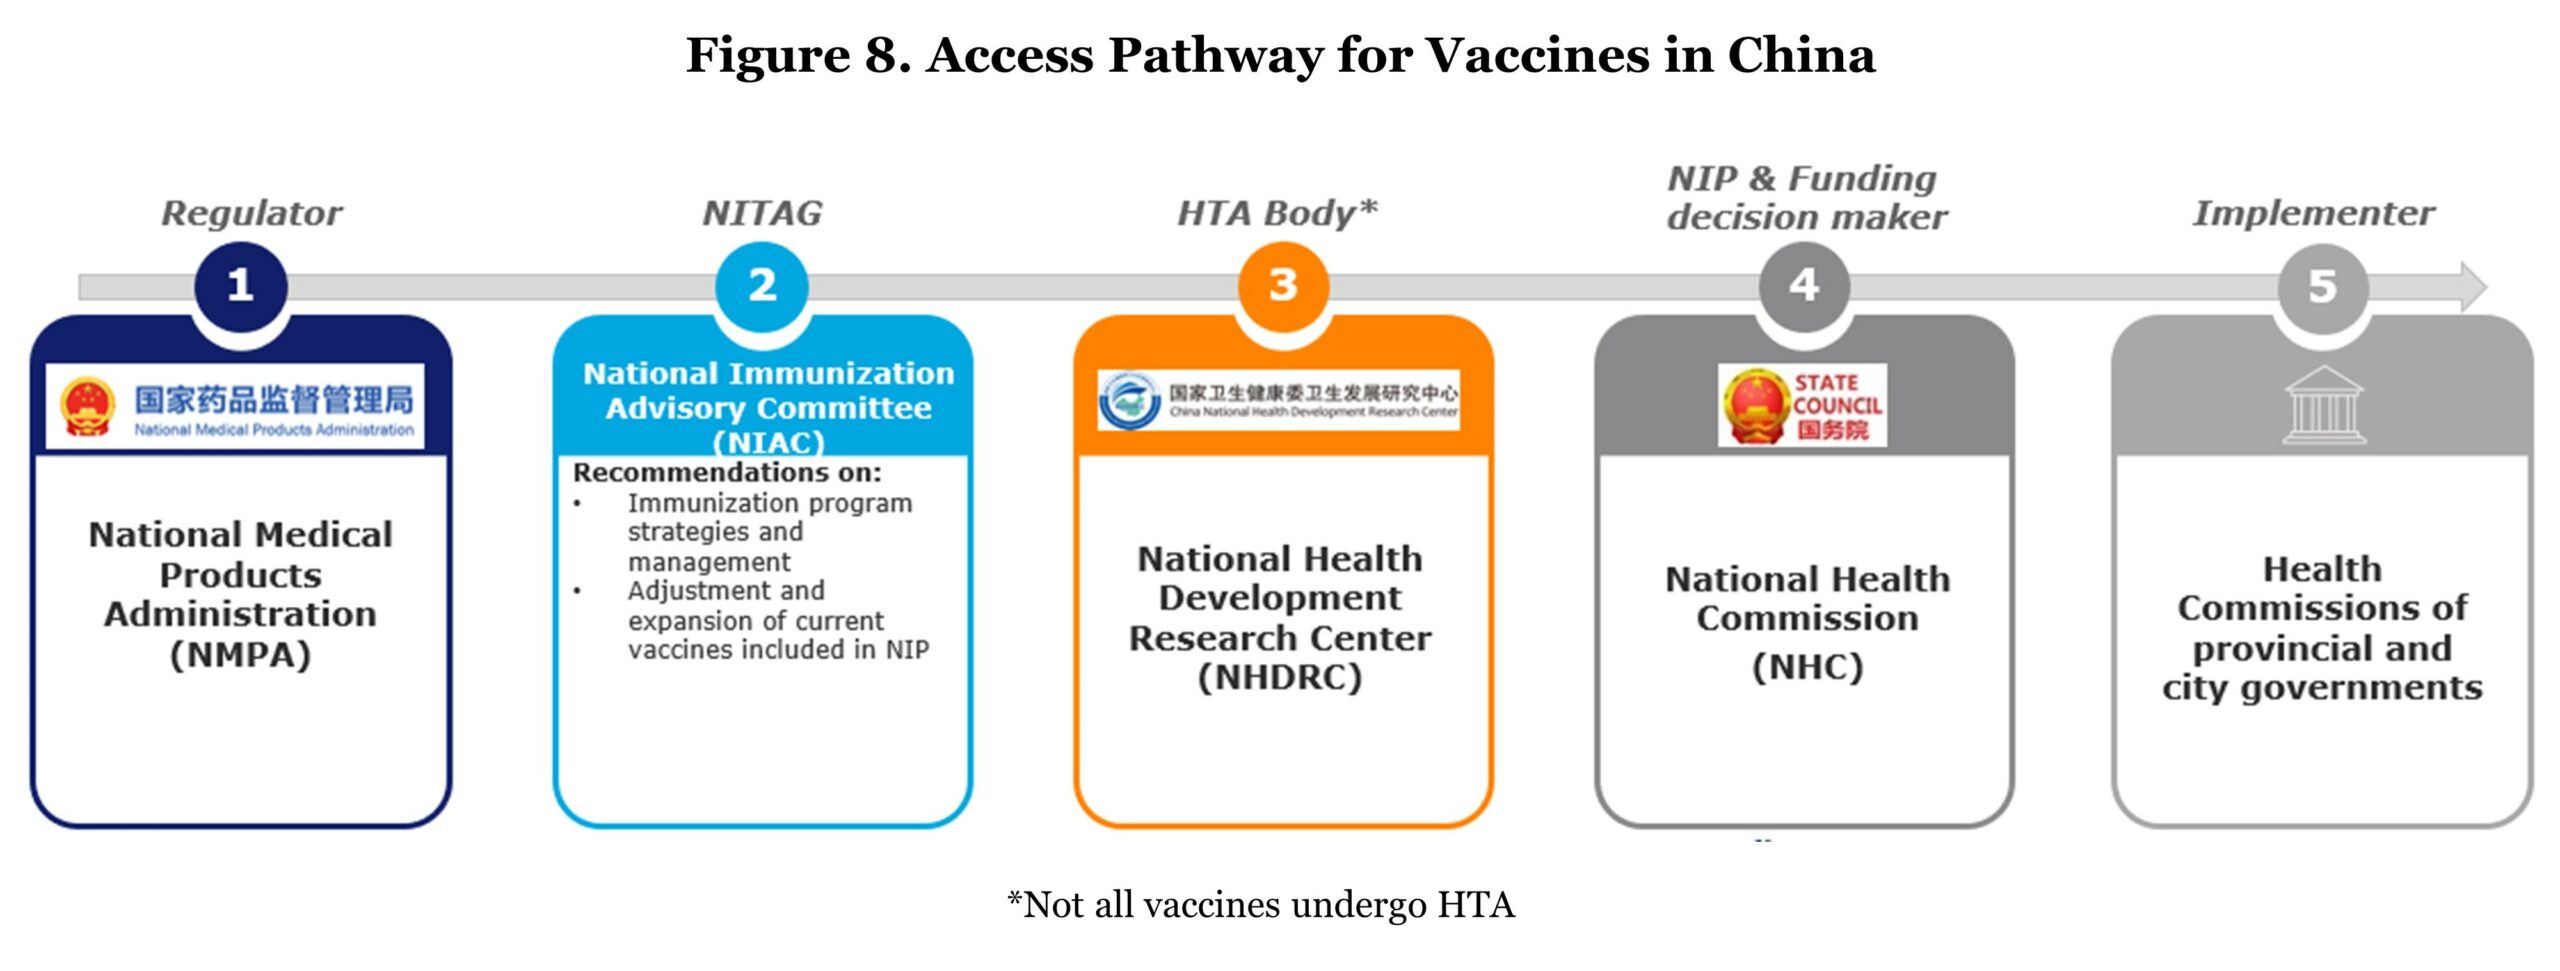 Figure 8. Access Pathway for Vaccines in China show 5 boxes. One is labeled Regulator, which includes the National Medical Products Administration (NMPA). Two is labeled National Immunization Advisory Committee (NIAC). Three is labeled HTA Body, and includes the National Health Development Research Center (NHDRC) with an asterisk that says not all vaccines undergo HTA. Four is labeled NIP and funding decision maker and includes the National Health Commission (NHC). Five is labeled Implementer and includes Health Commissions of provincial and city governments. 